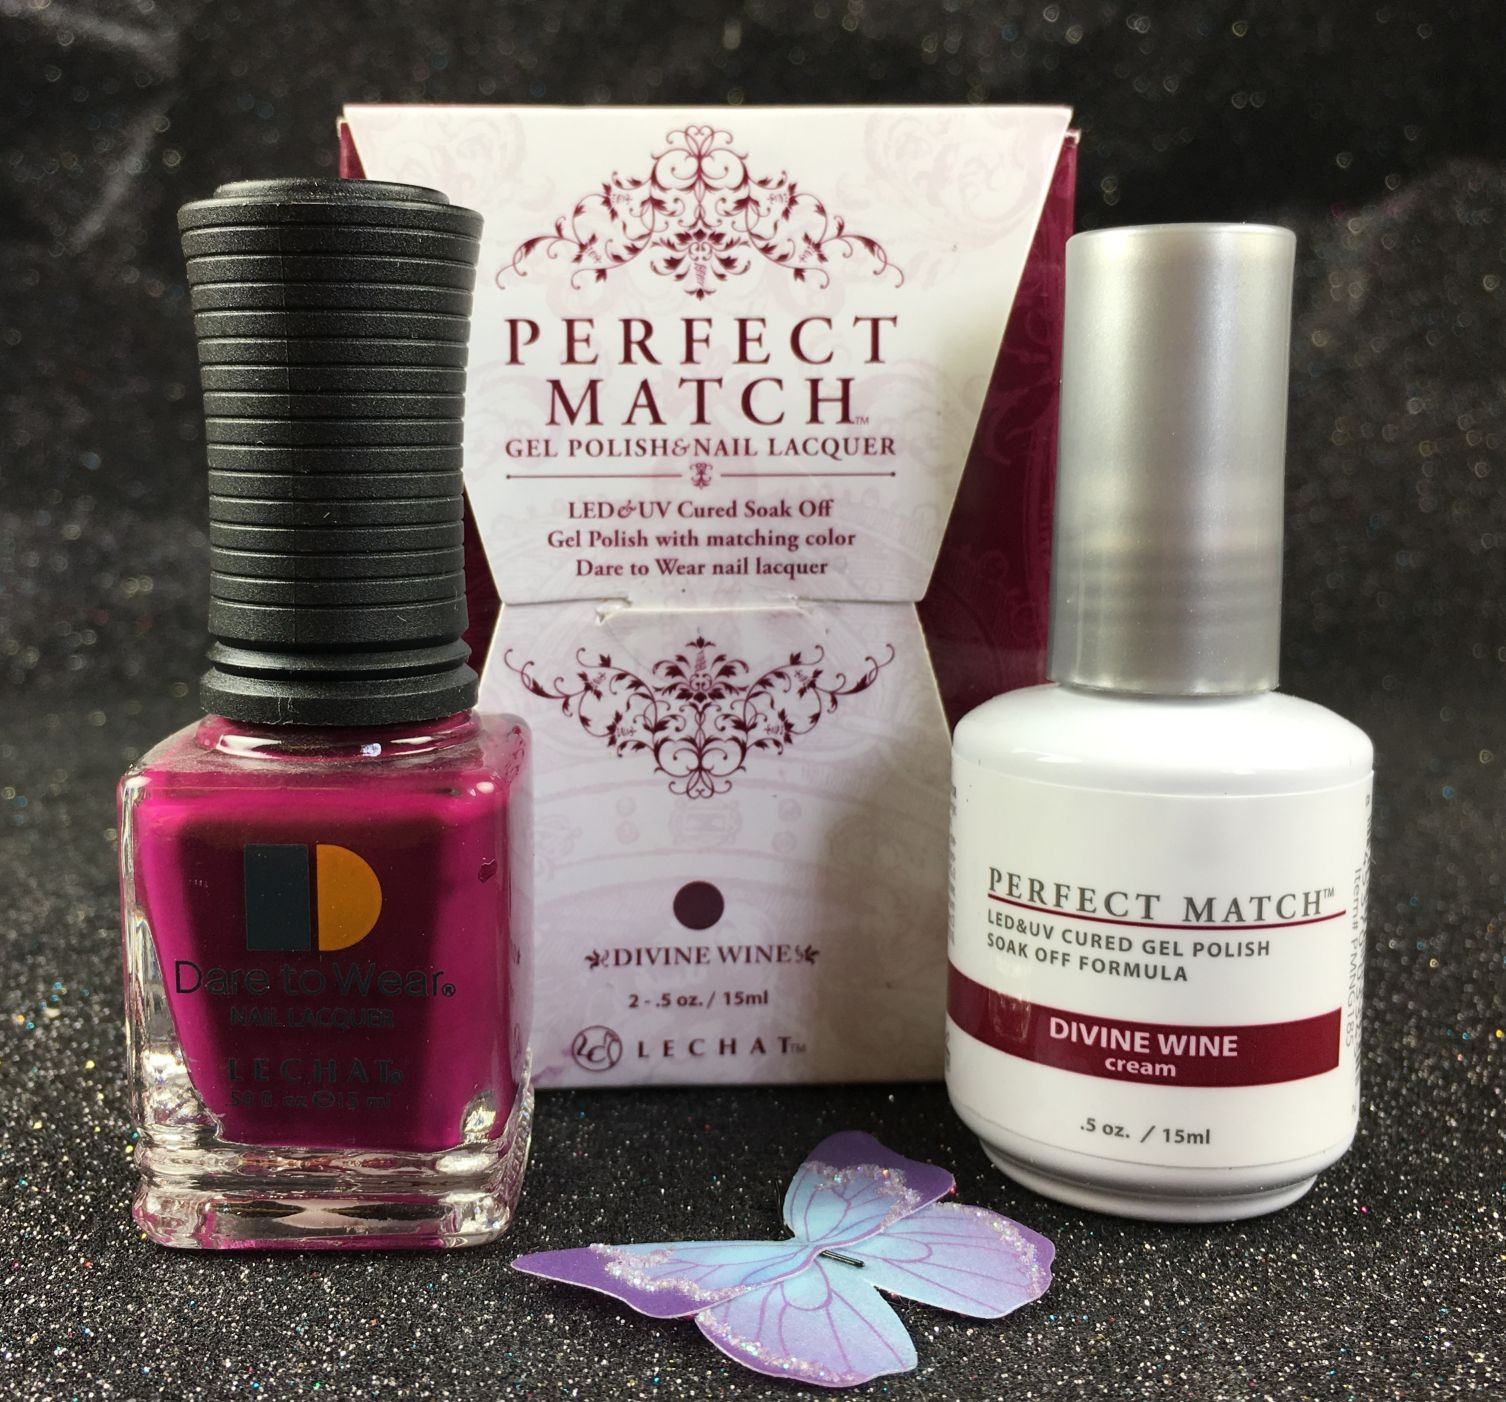 Perfect Match Nail Colors
 LeChat Perfect Match Gel Polish & Nail Lacquer Divine